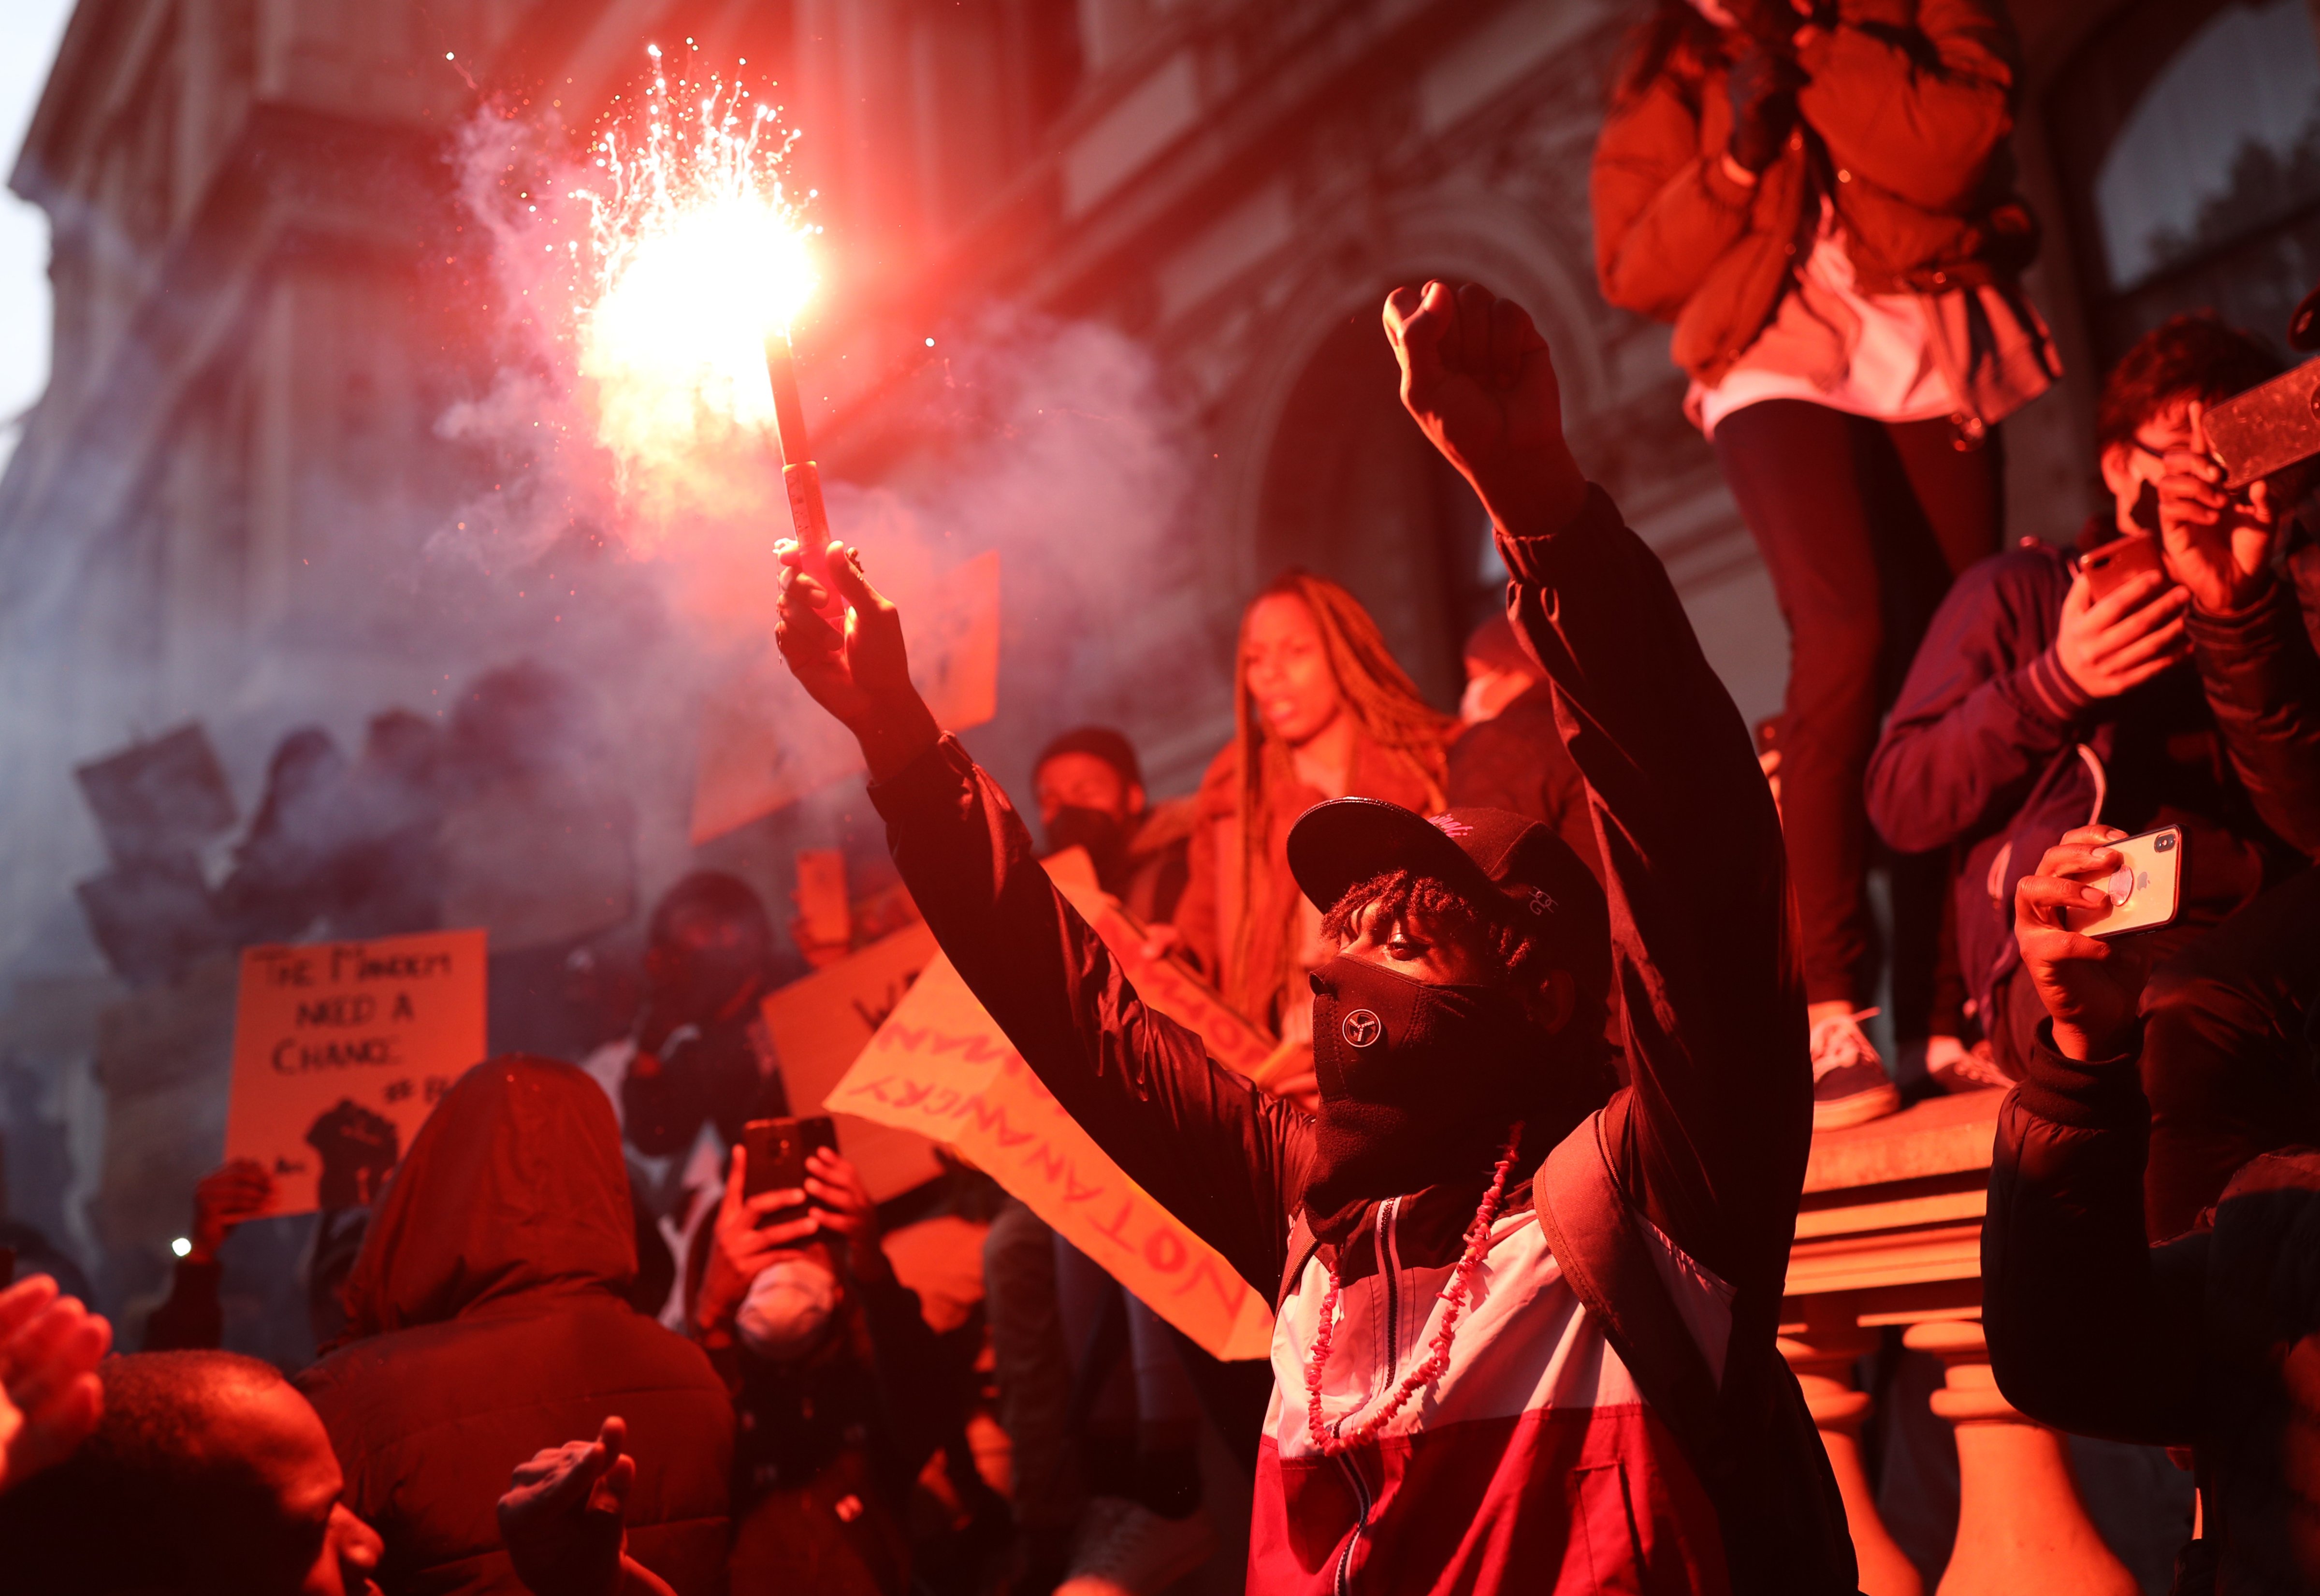 Protesters in Whitehall following a Black Lives Matter protest rally in Parliament Square, London (Yui Mok/PA Images via Getty Images—PA Wire/PA Images)